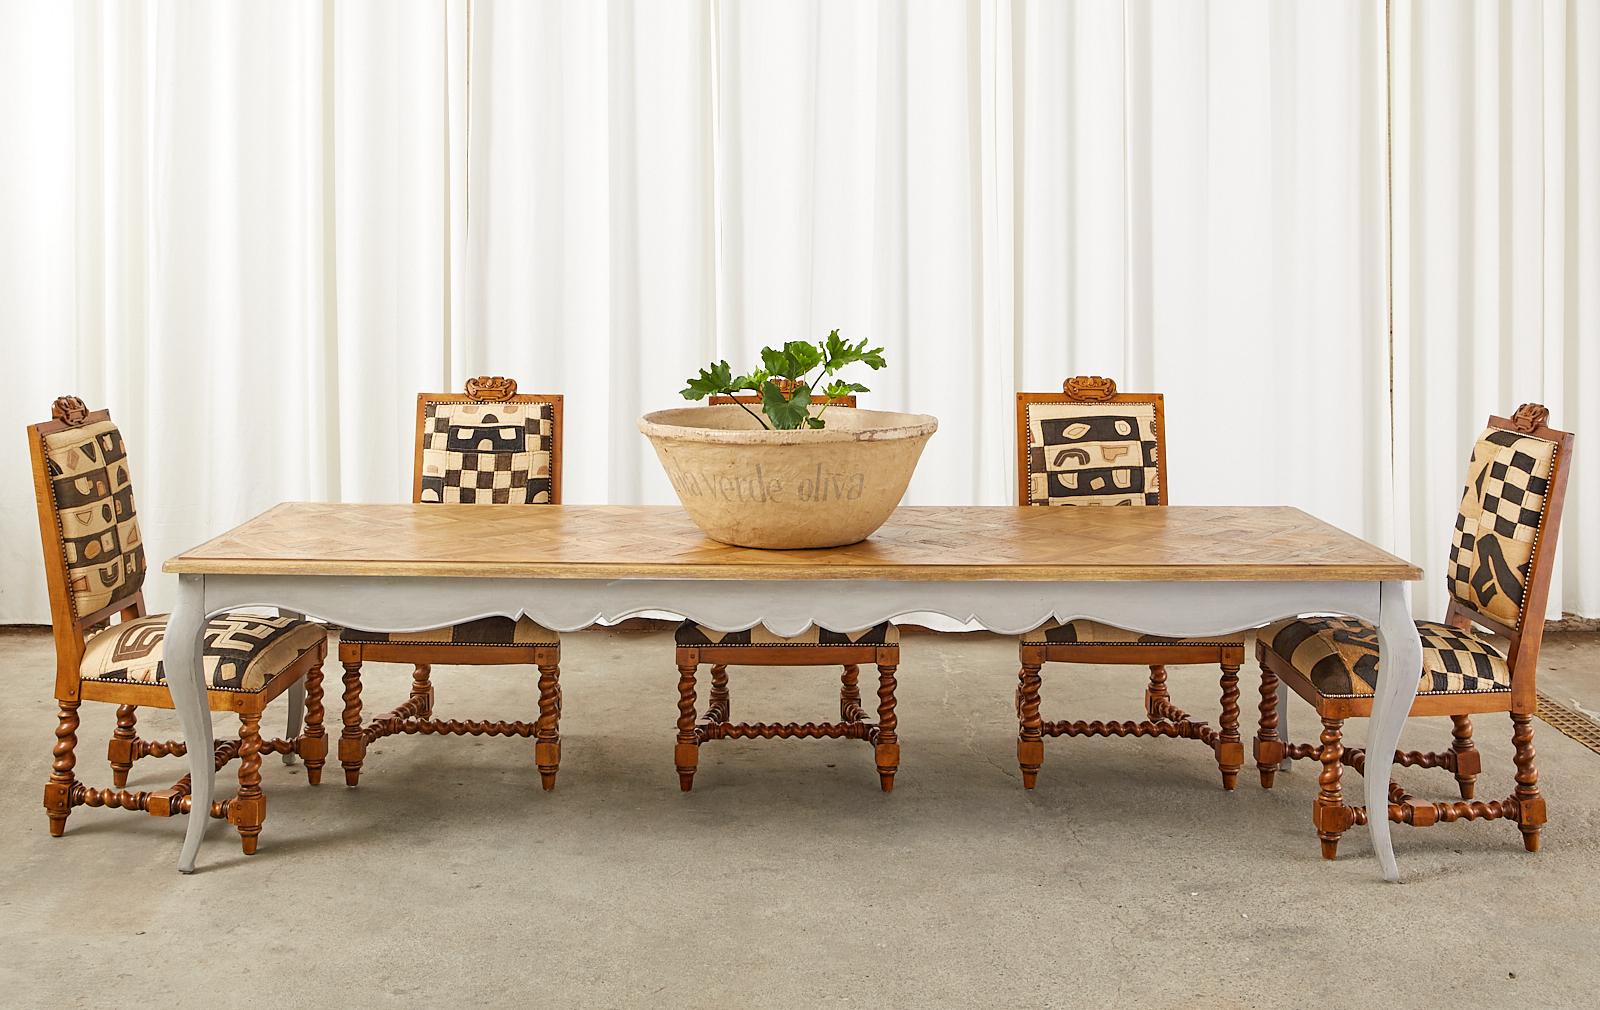 Country French provincial style dining or harvest farm table by Sarreid LTD. Monumental scale nearly 10 feet long featuring a dramatic hand-crafted oak parquet top. The table base has a scalloped apron supported by elegant cabriole legs all finished